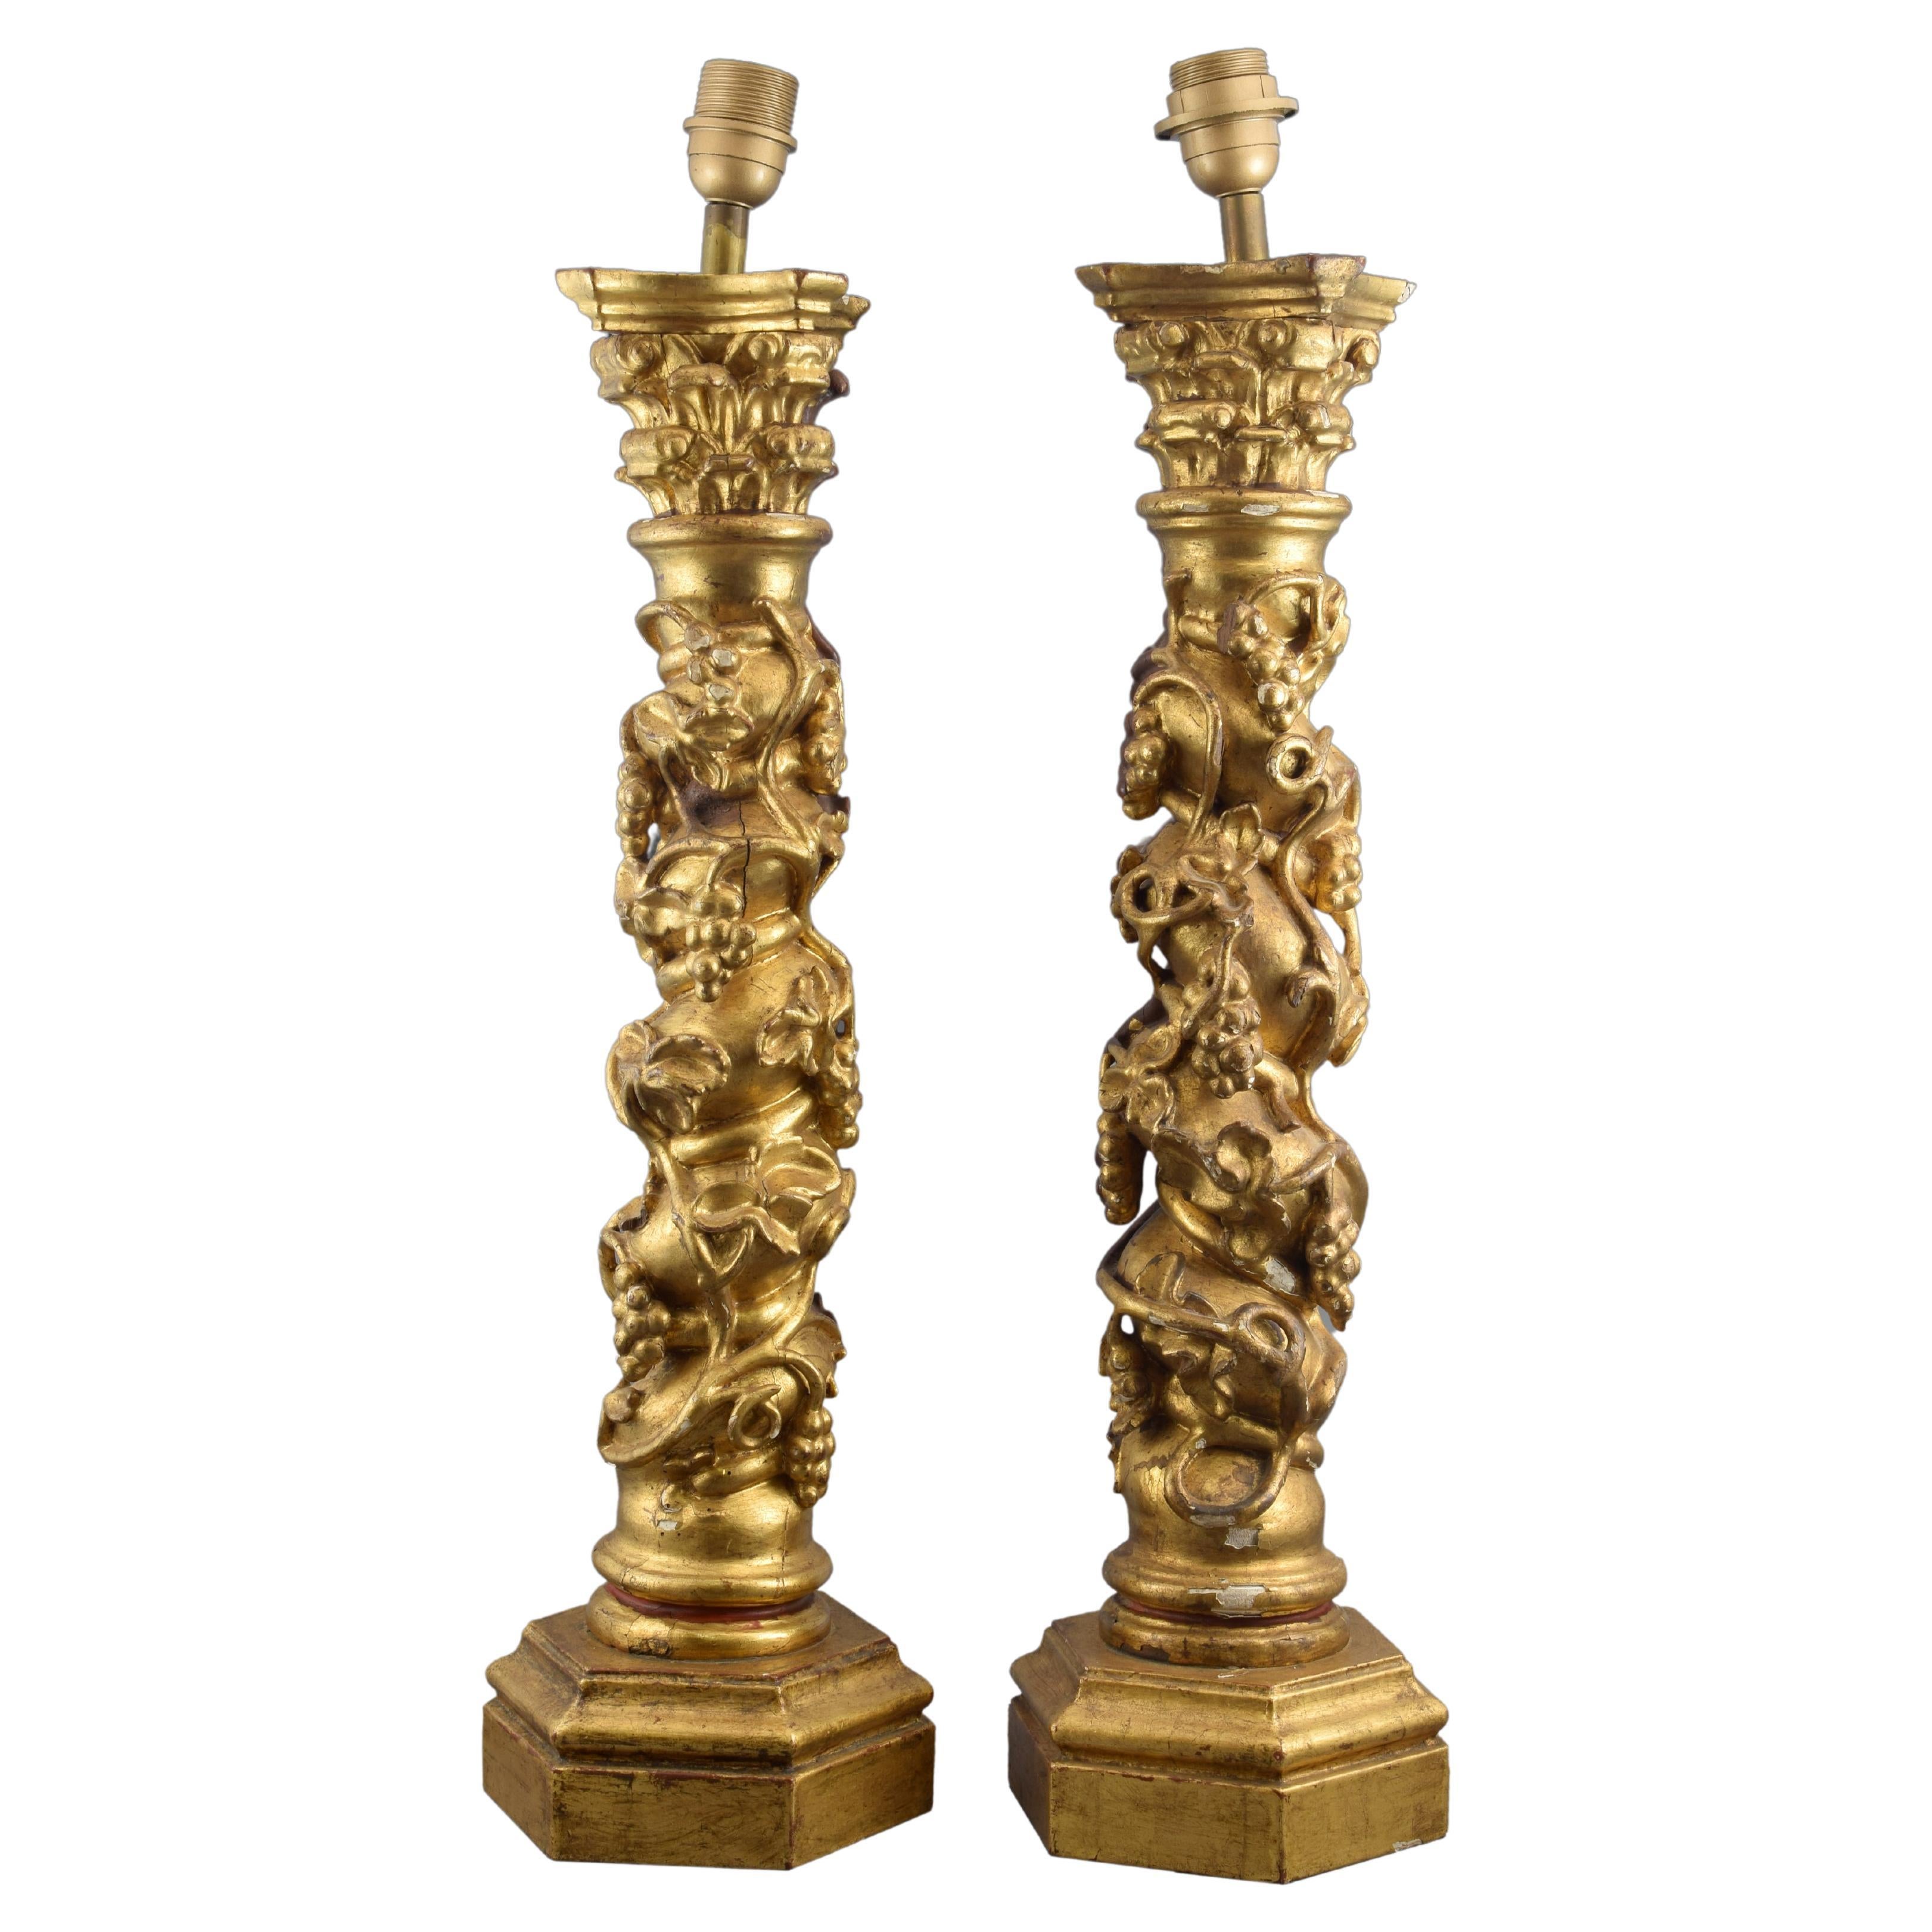 Pair of Table Lamps Made of Solomonic Columns, Wood and Metal, Late 17th Century